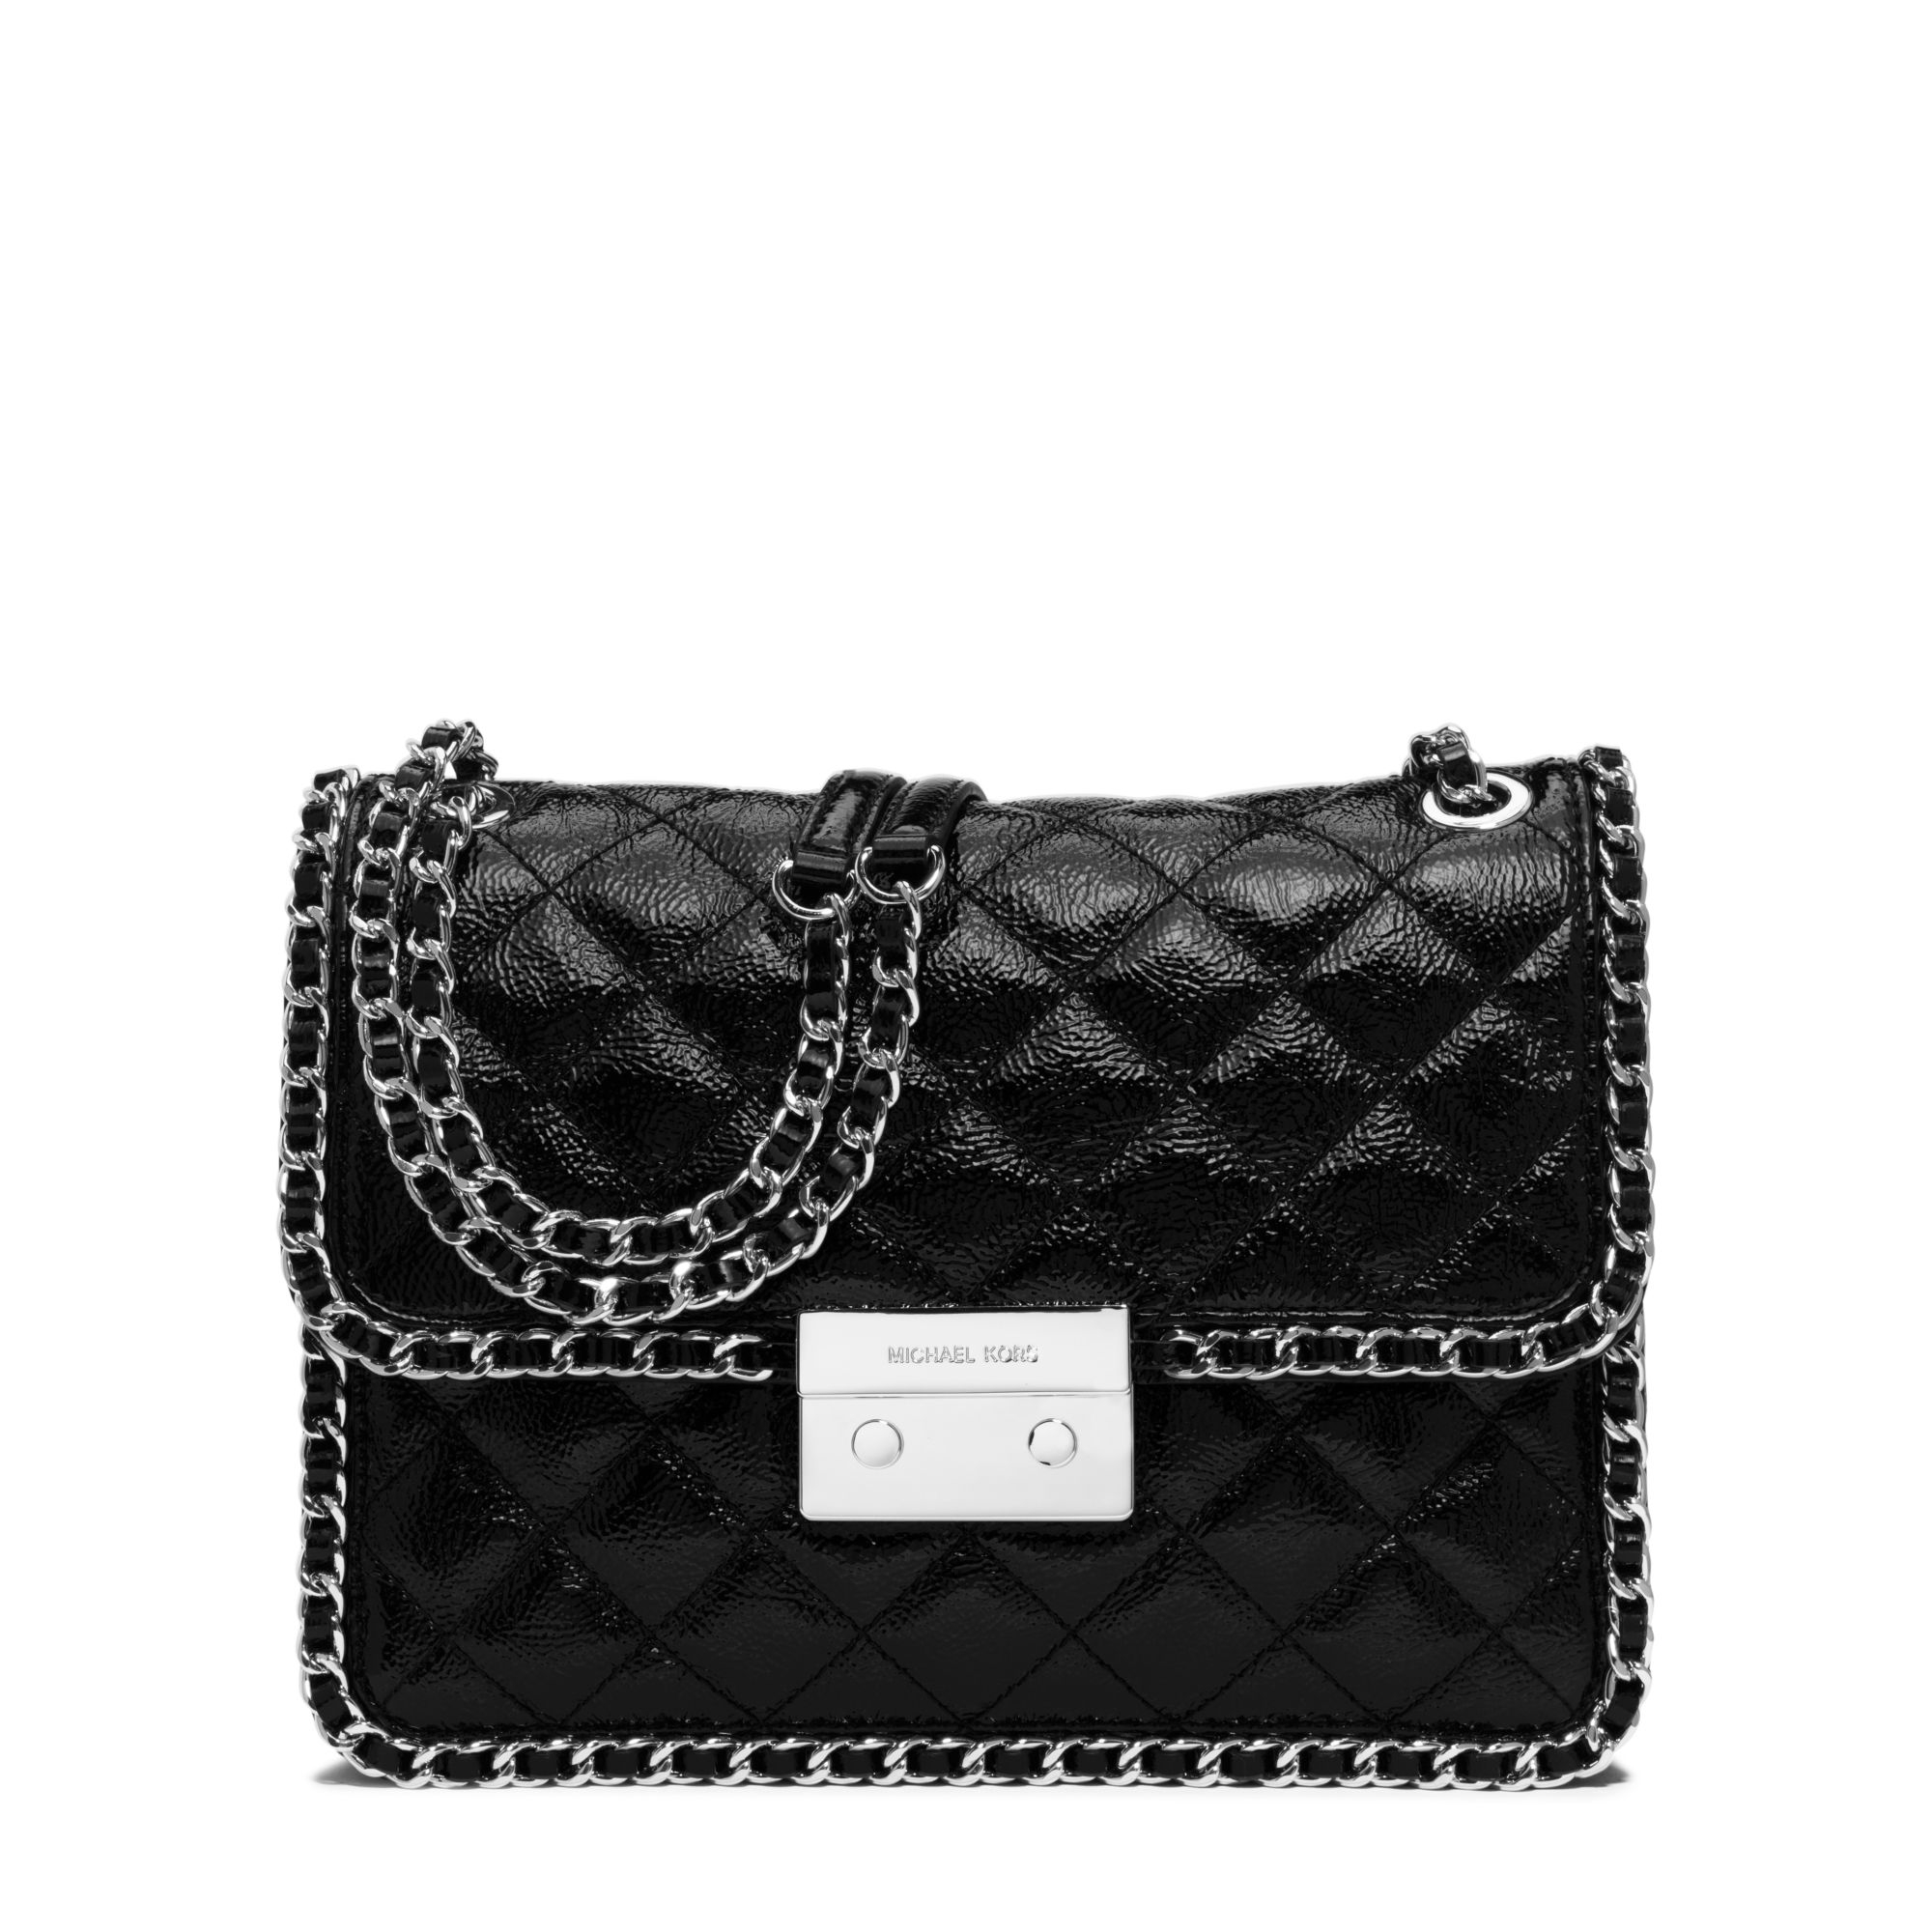 Lyst - Michael Kors Carine Large Quilted Patent-leather Shoulder Bag in ...